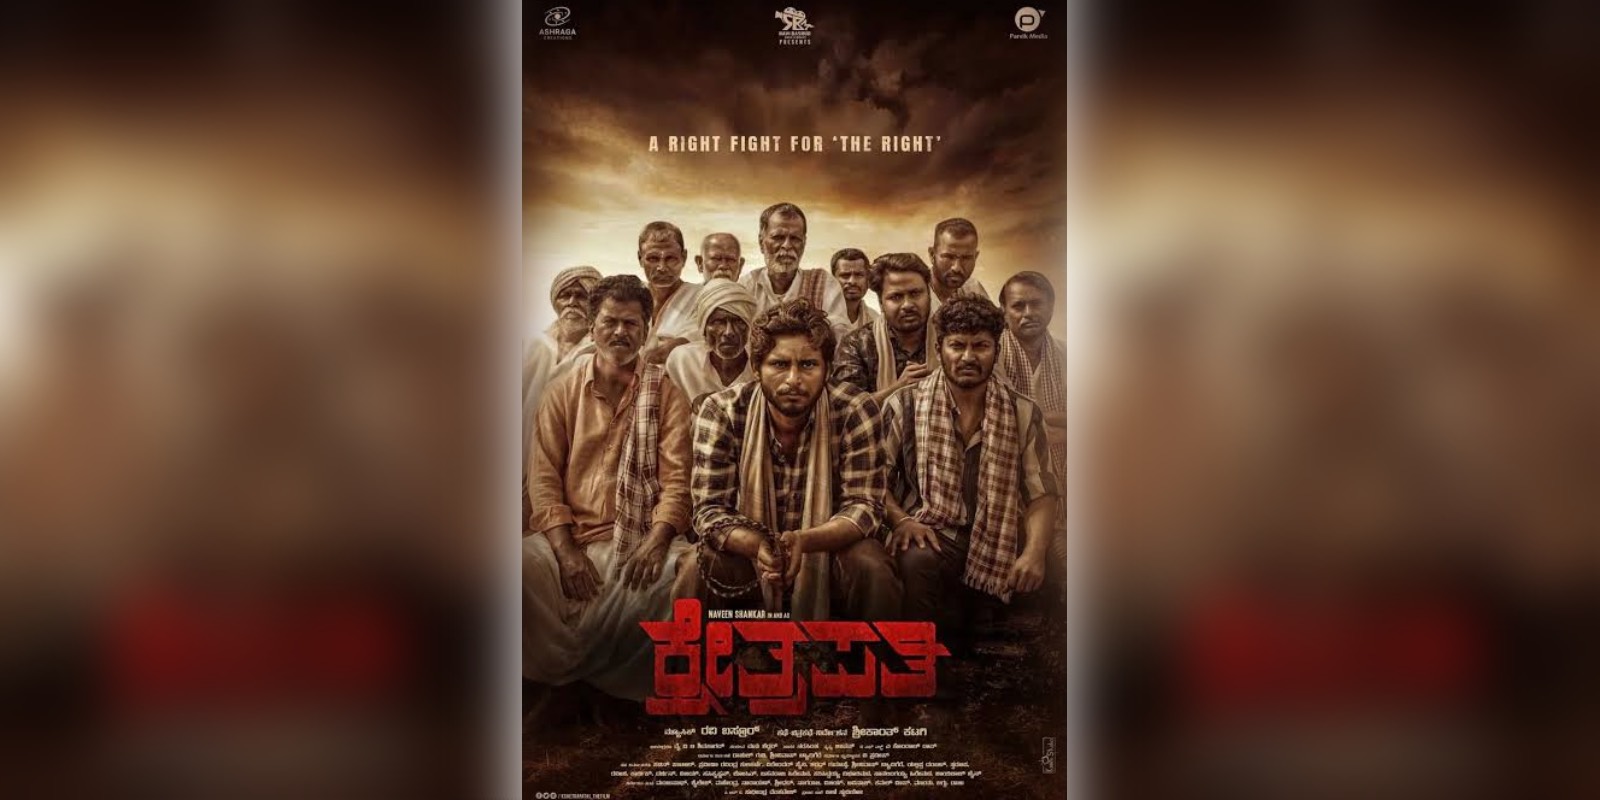 A poster of the film Kshetrapathi